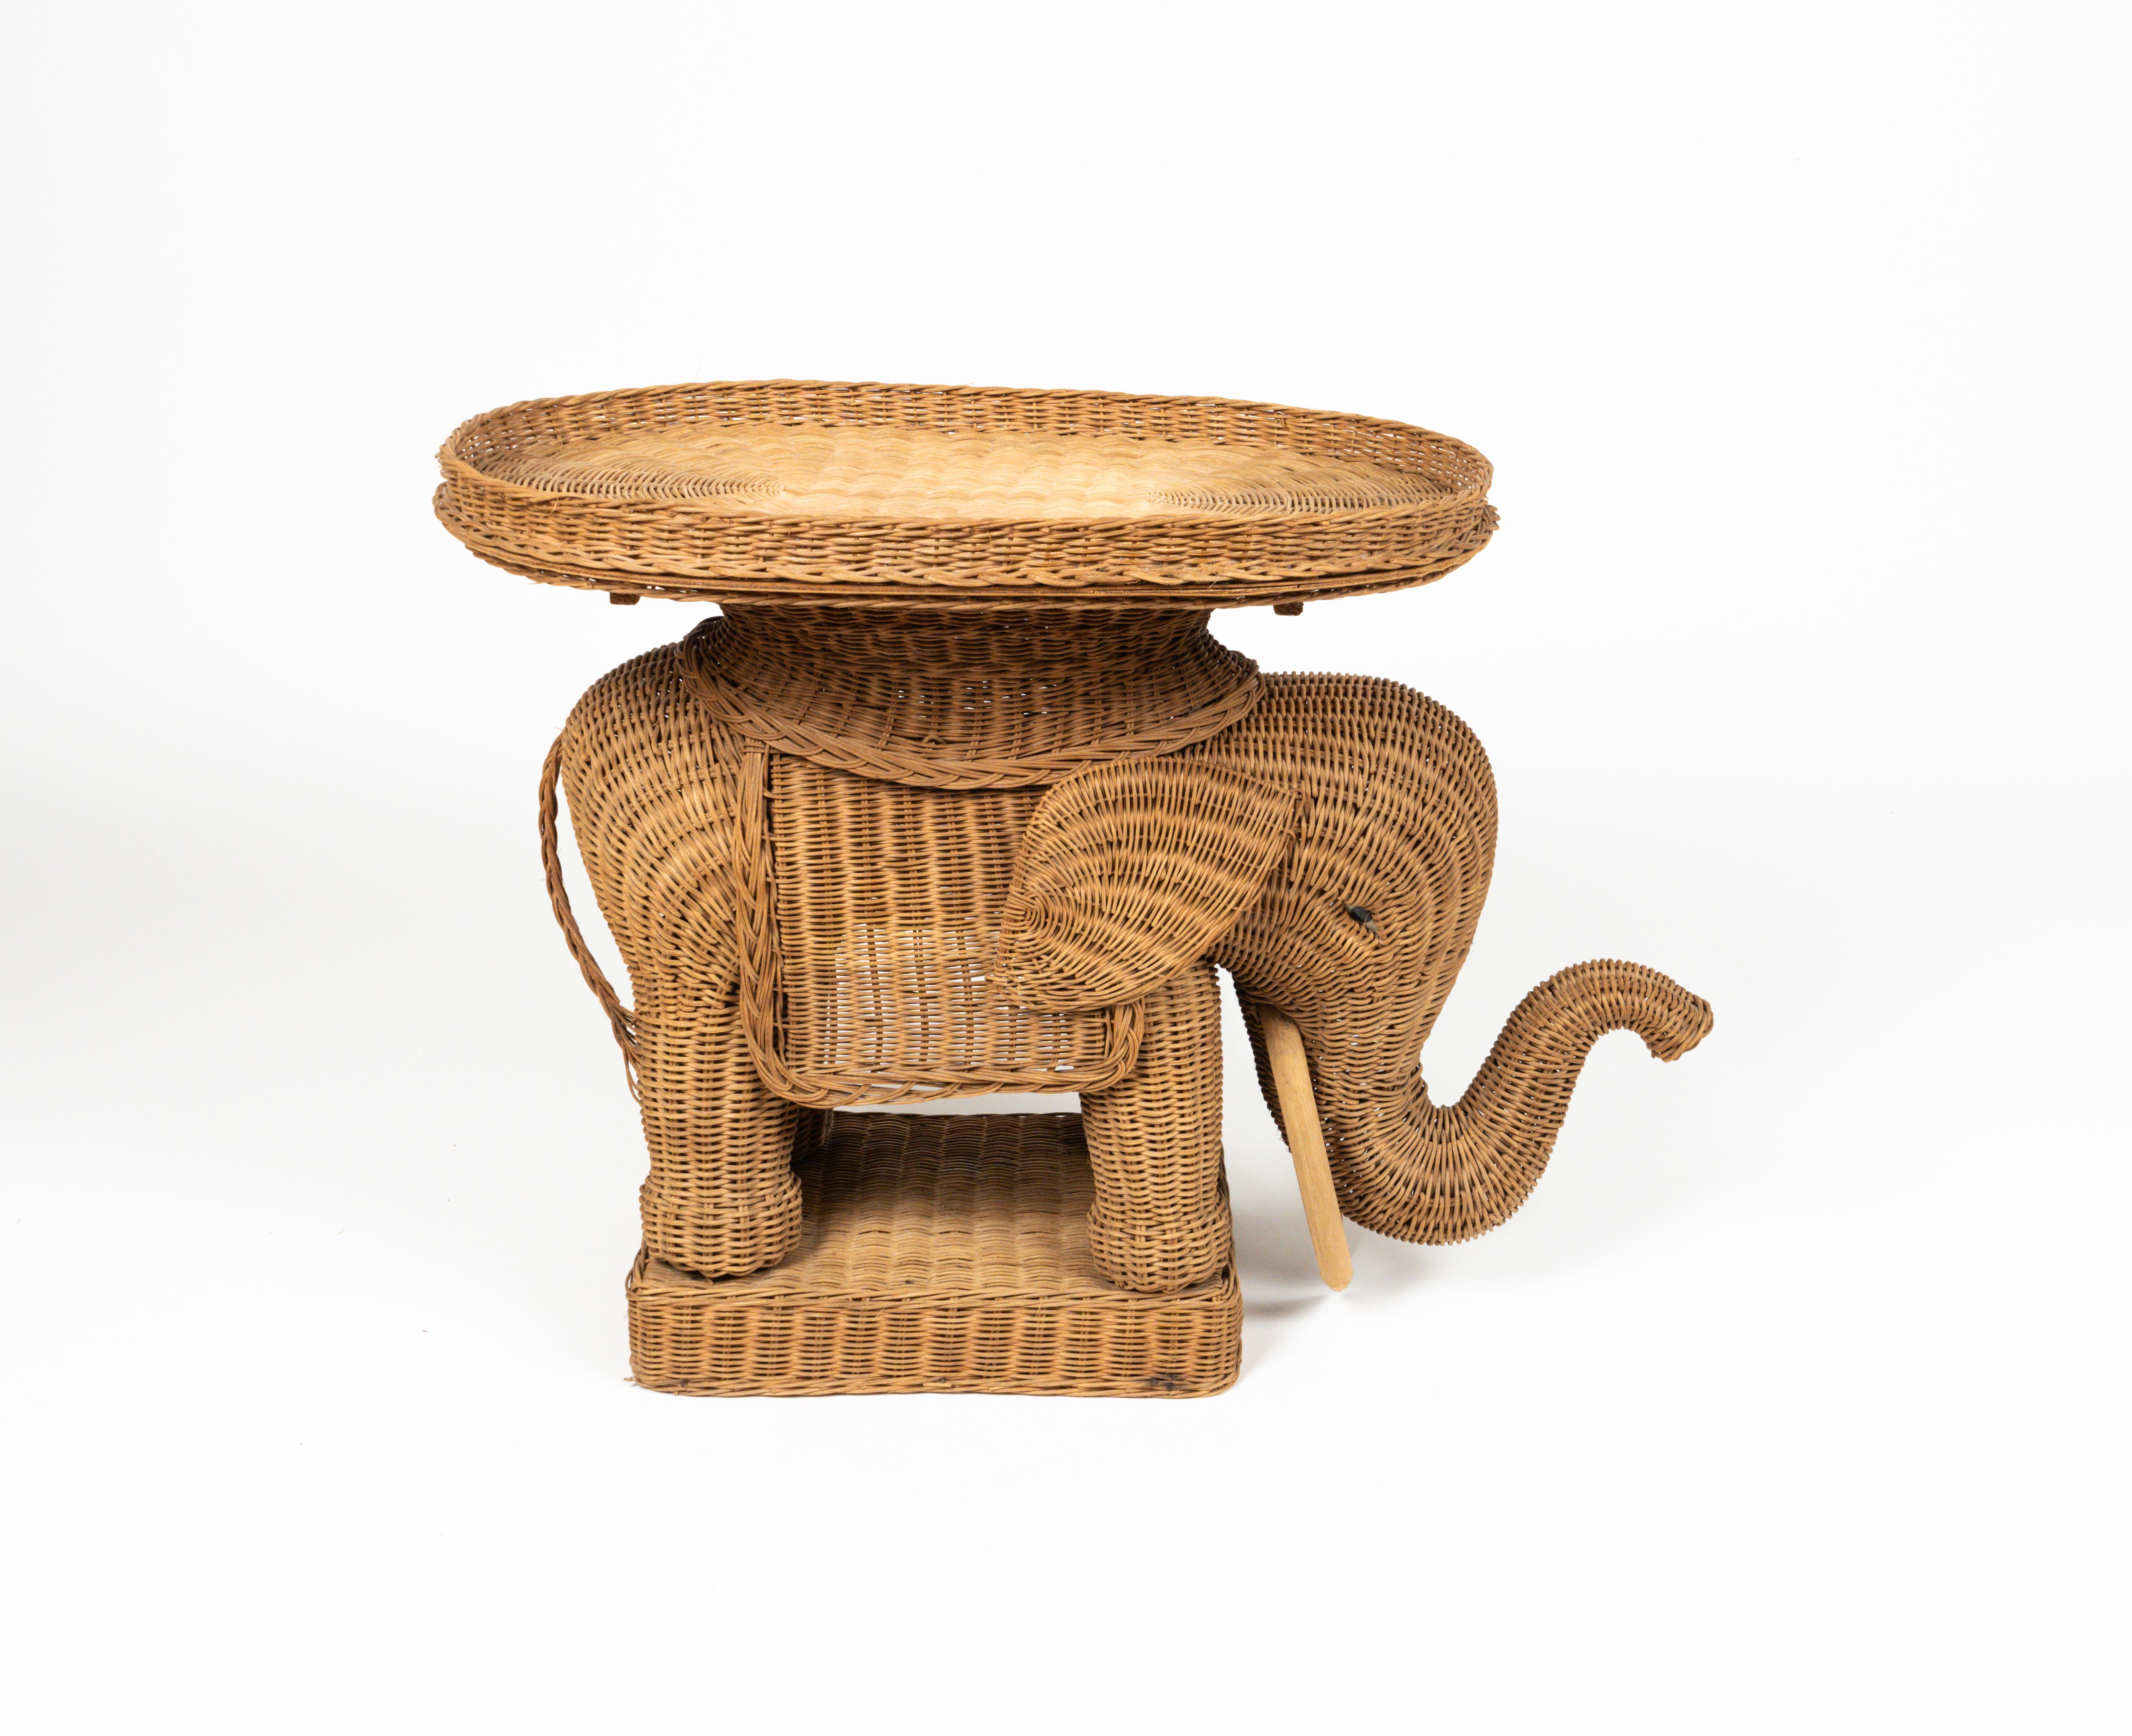 Rattan & Wicker Elephant Side Coffee Table Vivai Del Sud Style, Italy, 1960s For Sale 12